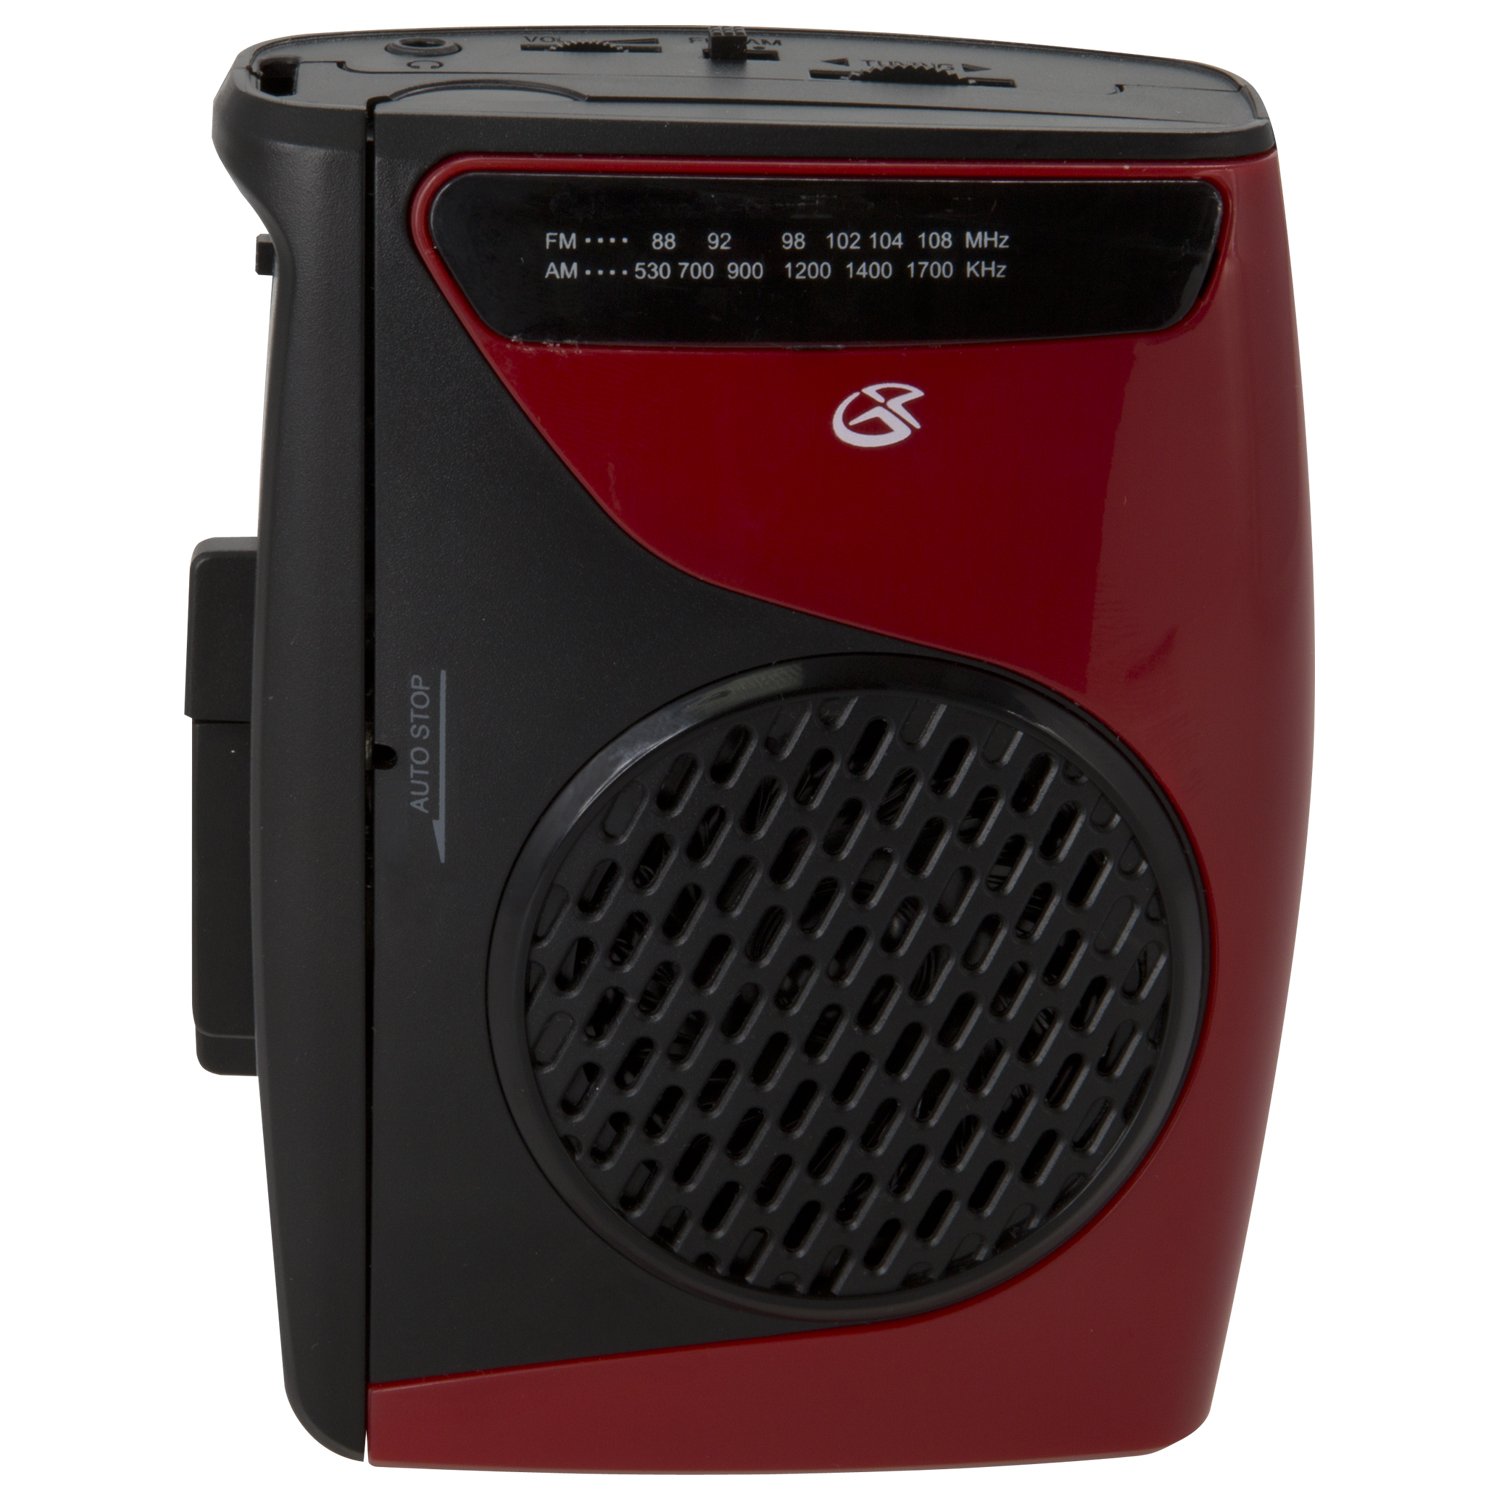 GPX Portable Cassette Player, 3.54 x 1.57 x 4.72 Inches, Requires 2 AA Batteries - Not Included, Red/Black (CAS337B) Black/Red